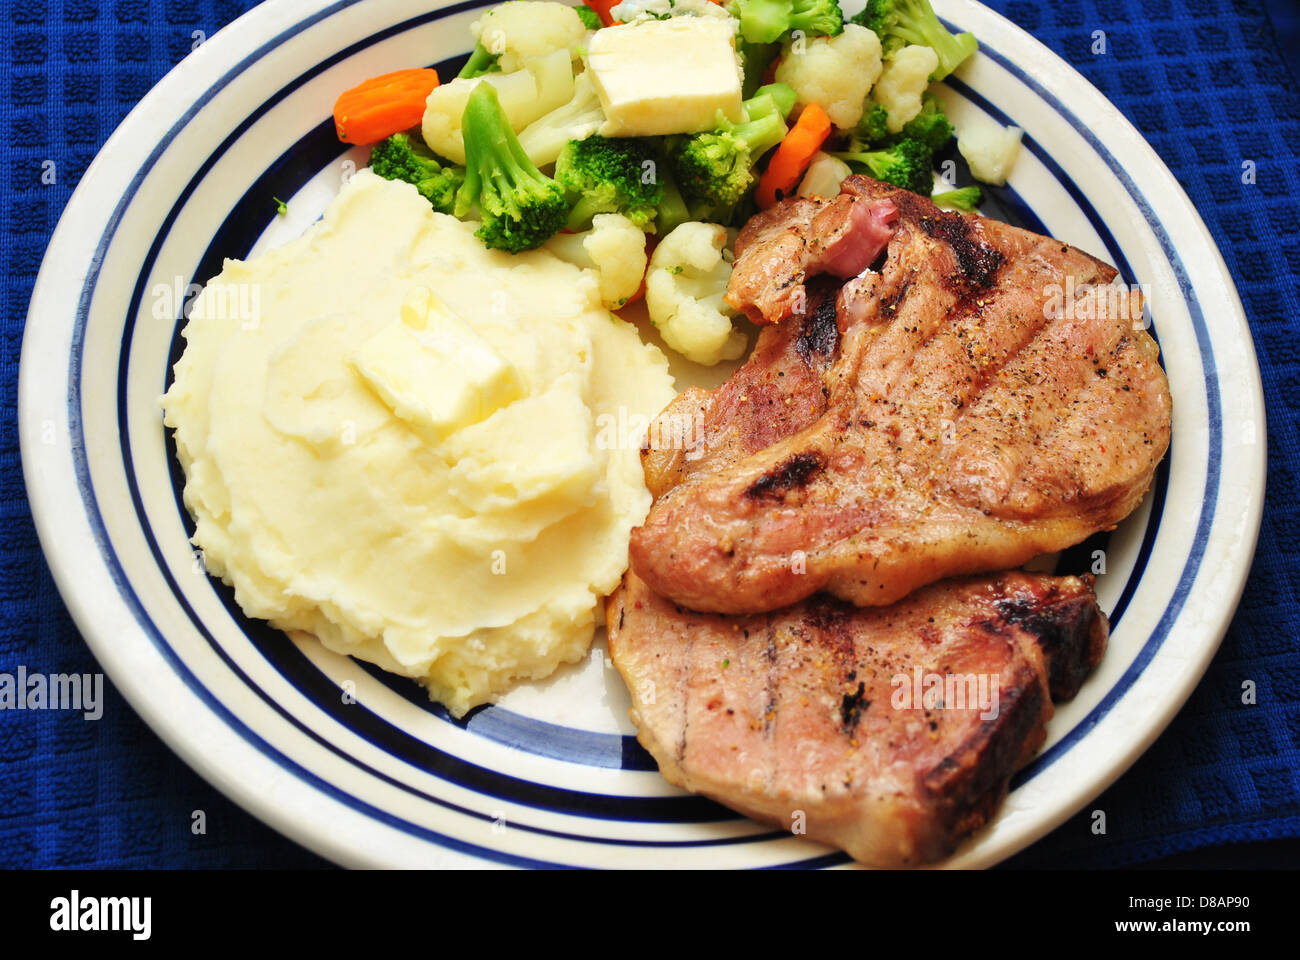 Grilled Pork Chop Dinner with Side Dishes Stock Photo